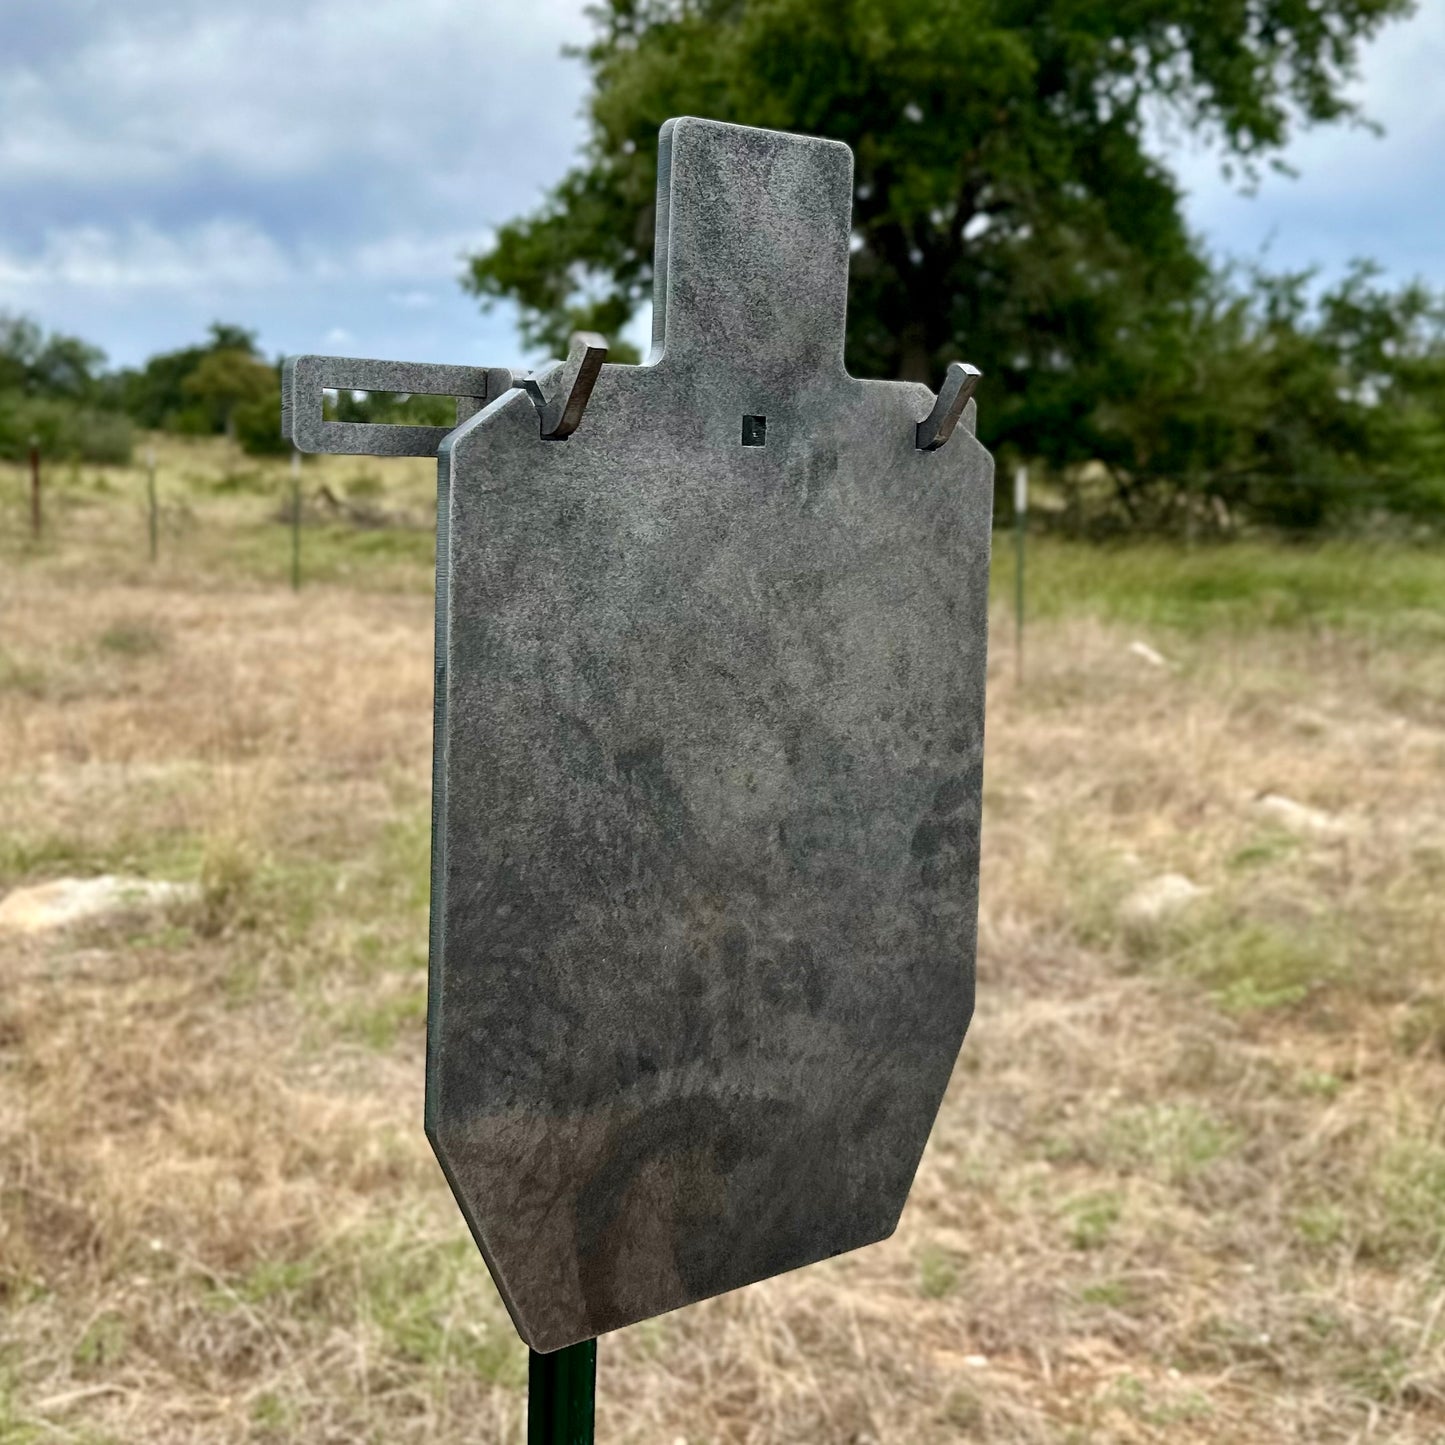 AR500 IPSC Silhouette Gong/Static Target